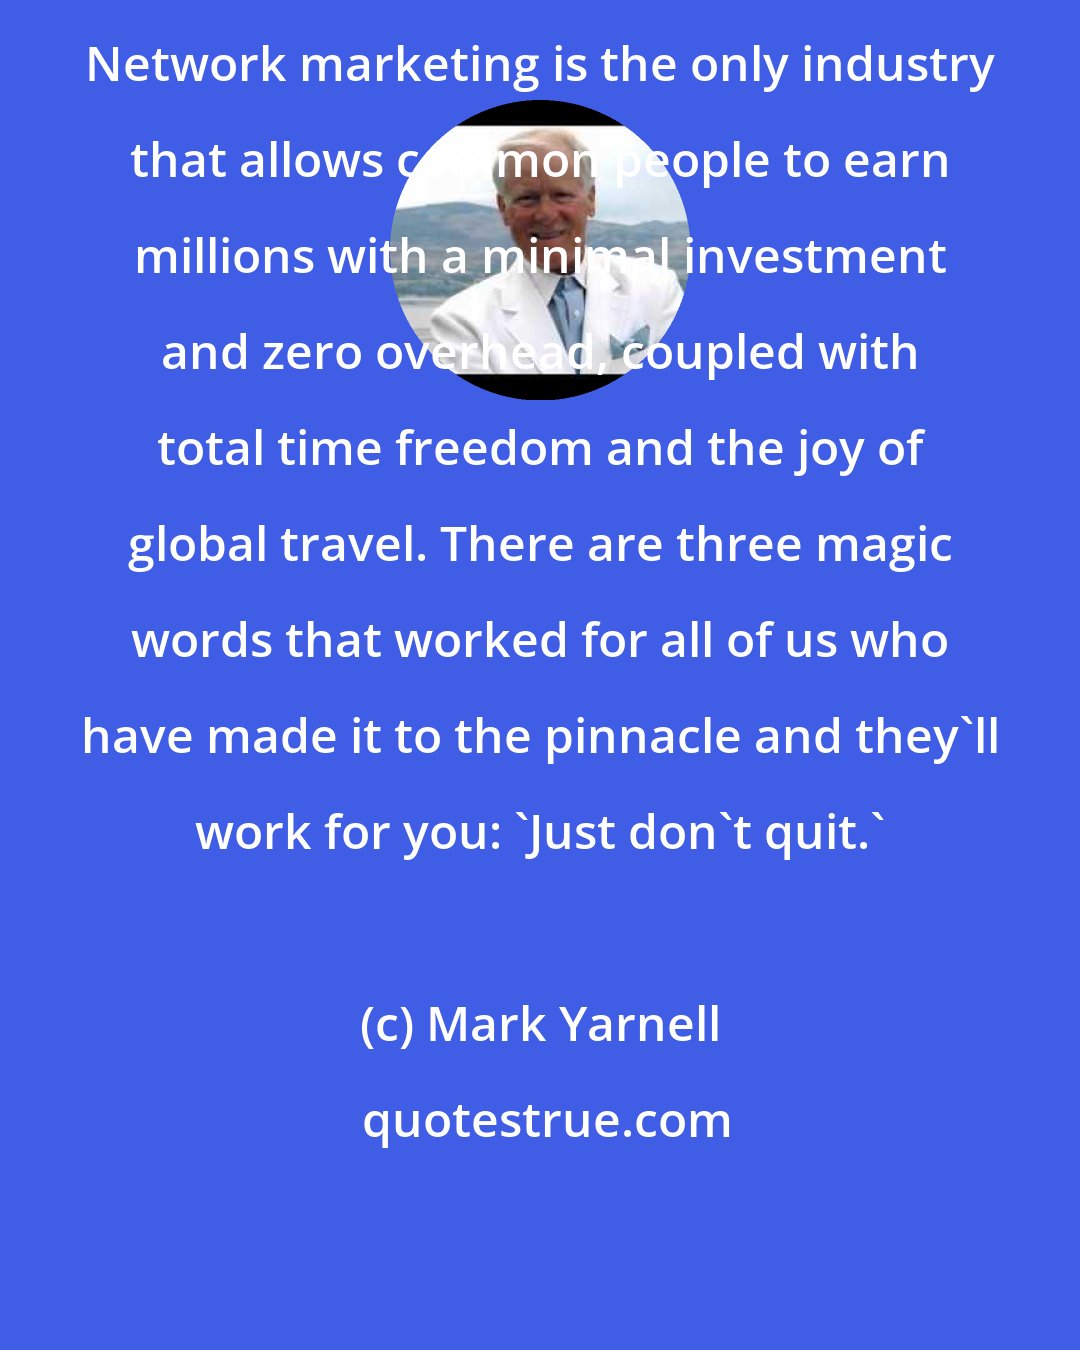 Mark Yarnell: Network marketing is the only industry that allows common people to earn millions with a minimal investment and zero overhead, coupled with total time freedom and the joy of global travel. There are three magic words that worked for all of us who have made it to the pinnacle and they'll work for you: 'Just don't quit.'